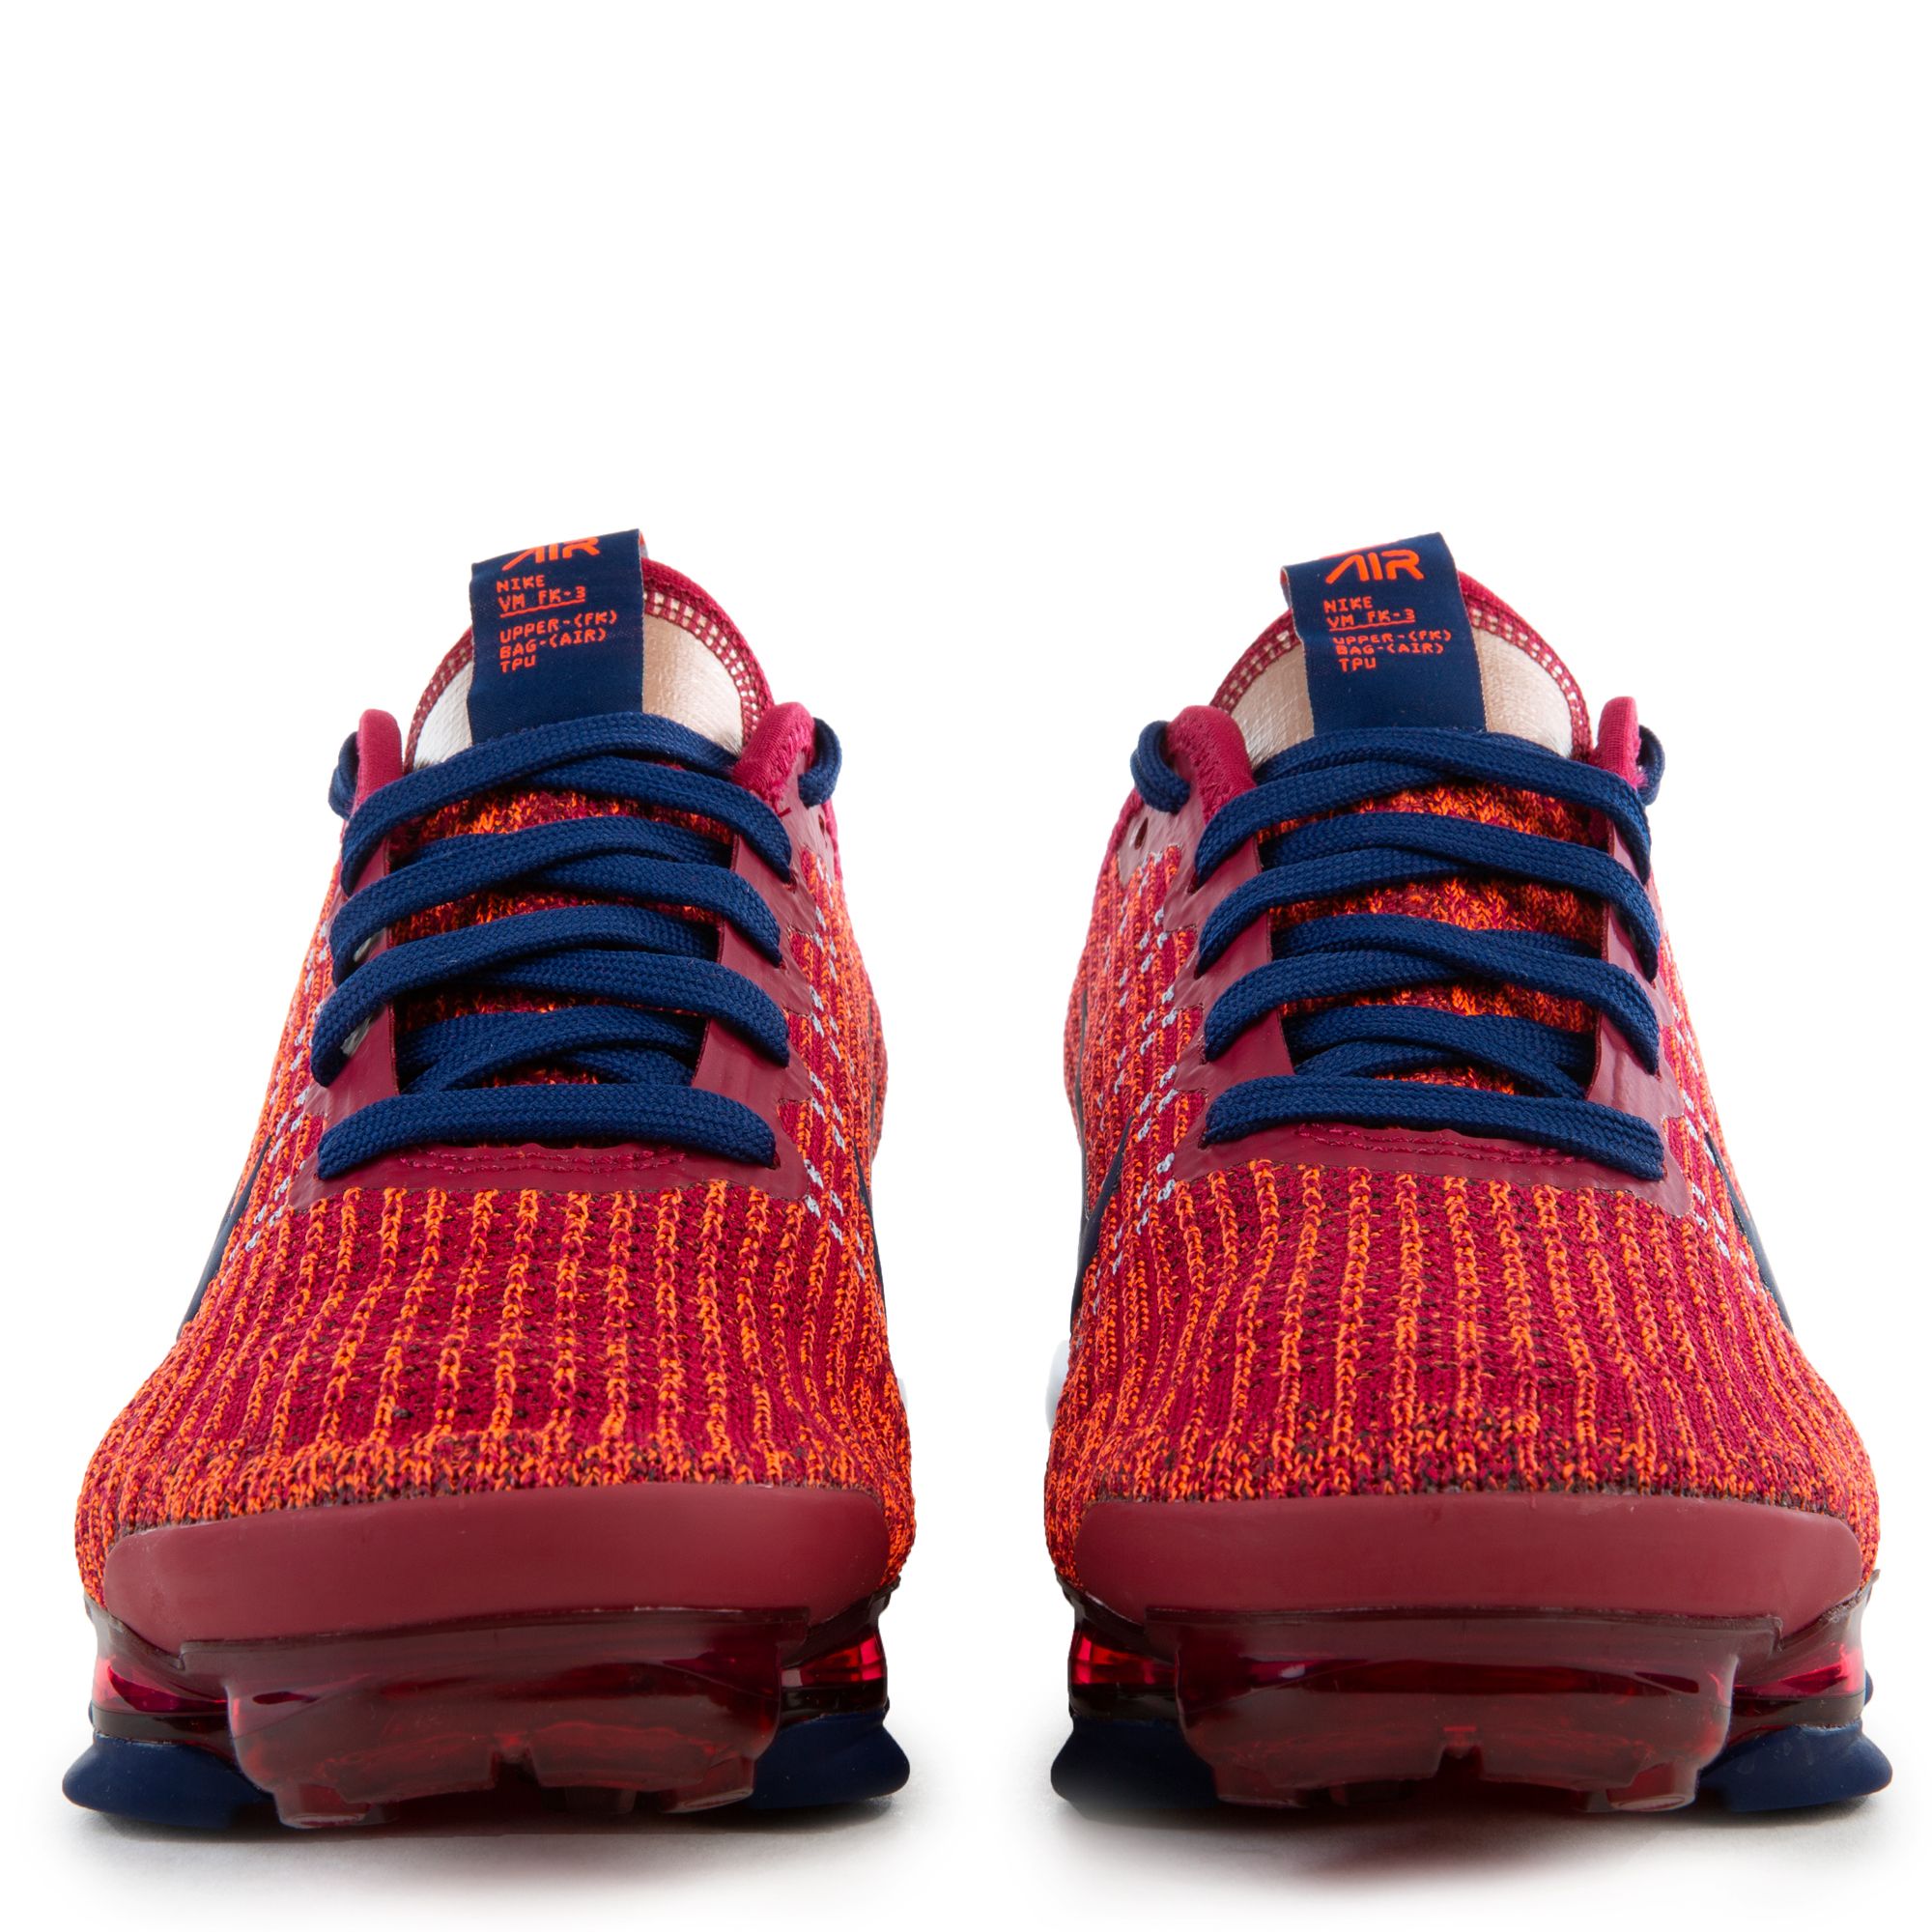 vapormax flyknit 3 red and blue